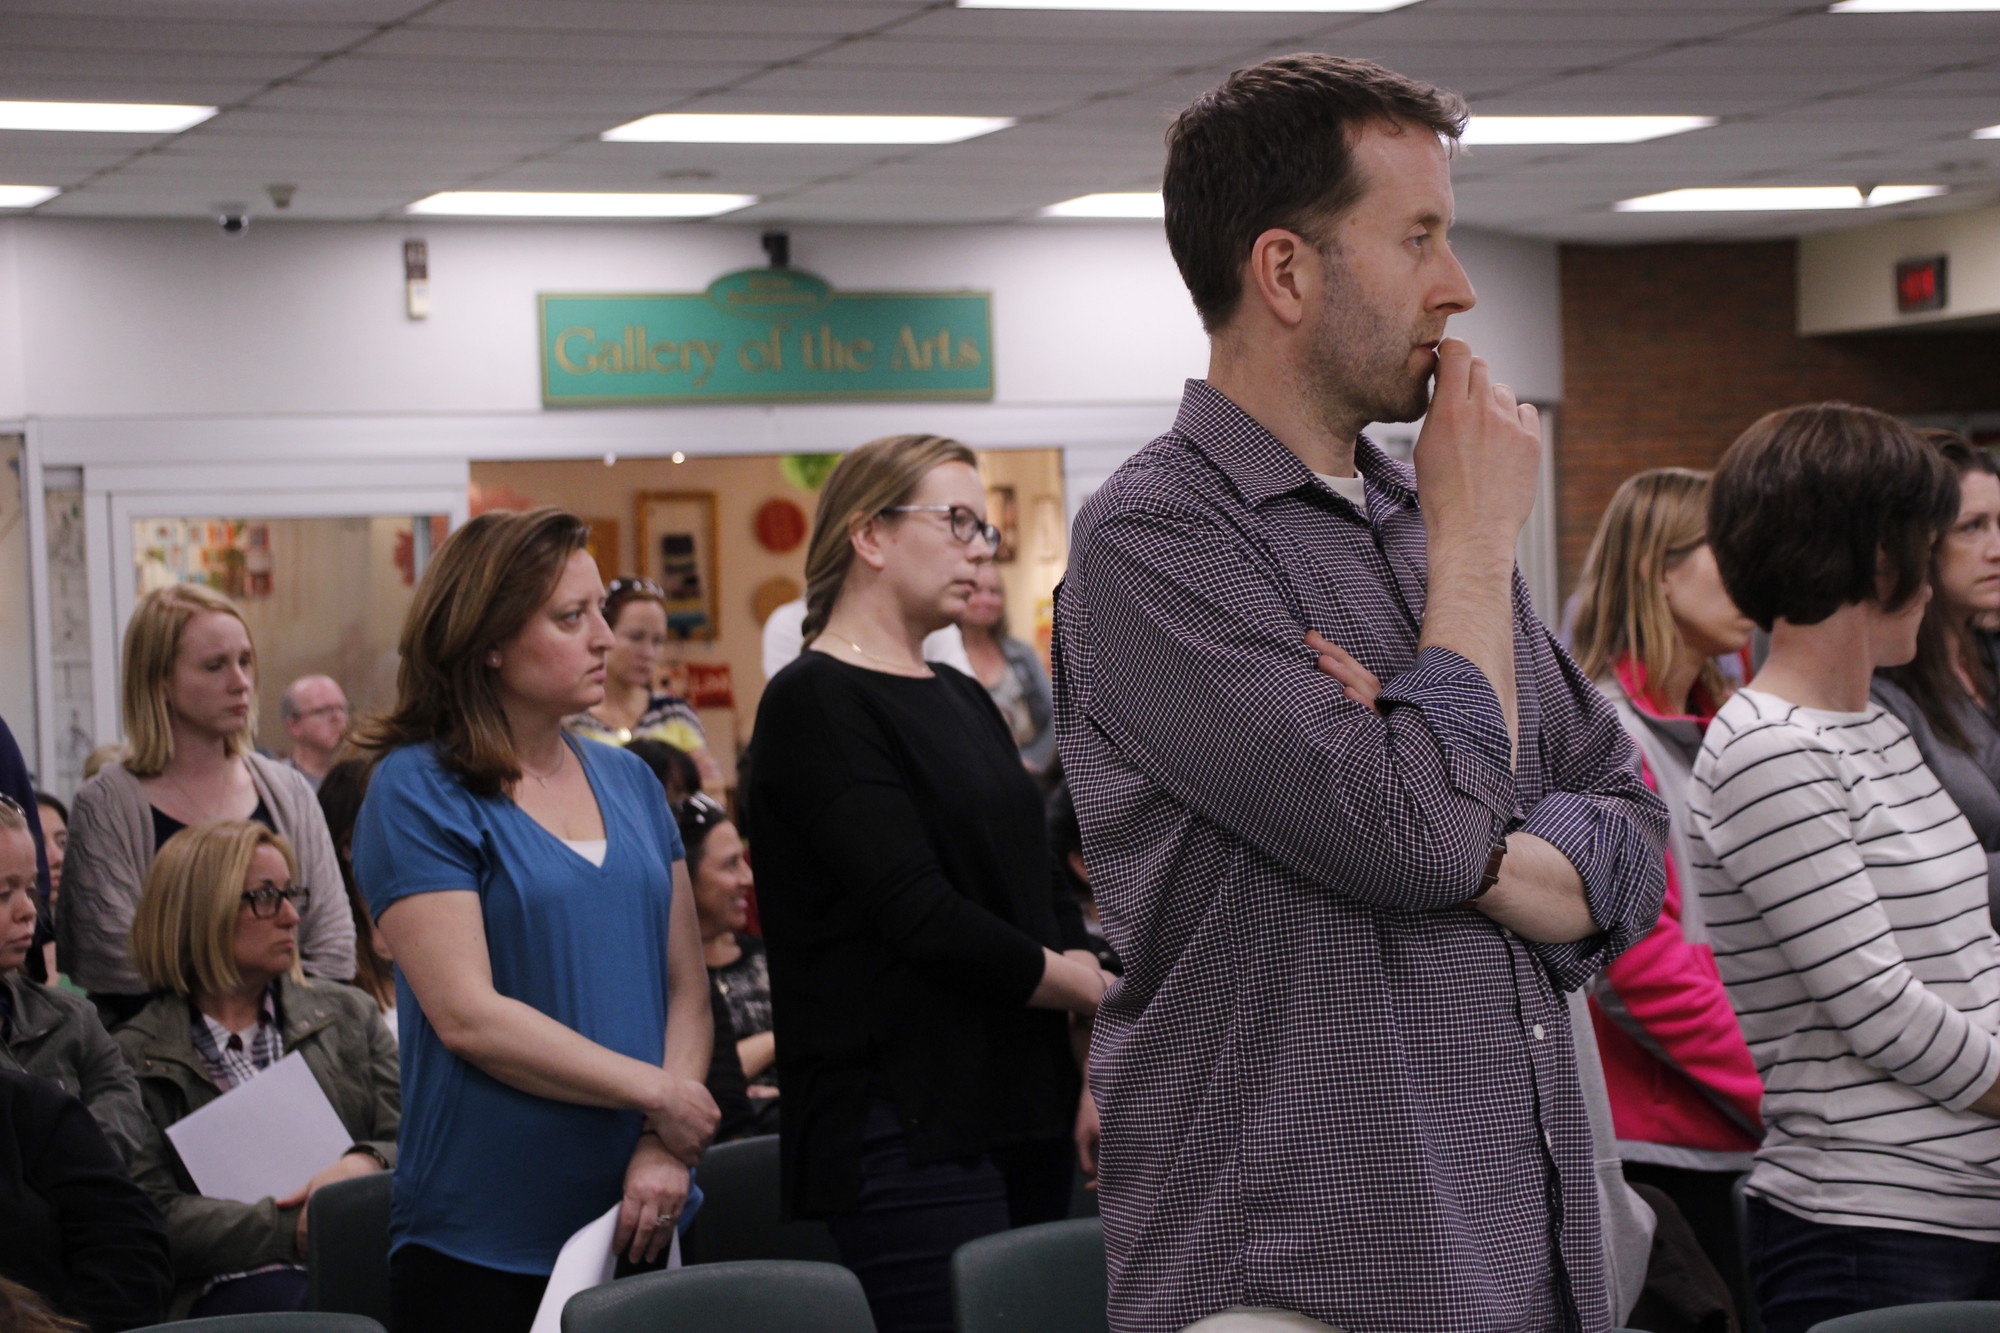 Dozens of residents stood to show their support while Sean Murray presented the Board of Education with a petition urging trustees to revise the high school’s renovation plans.